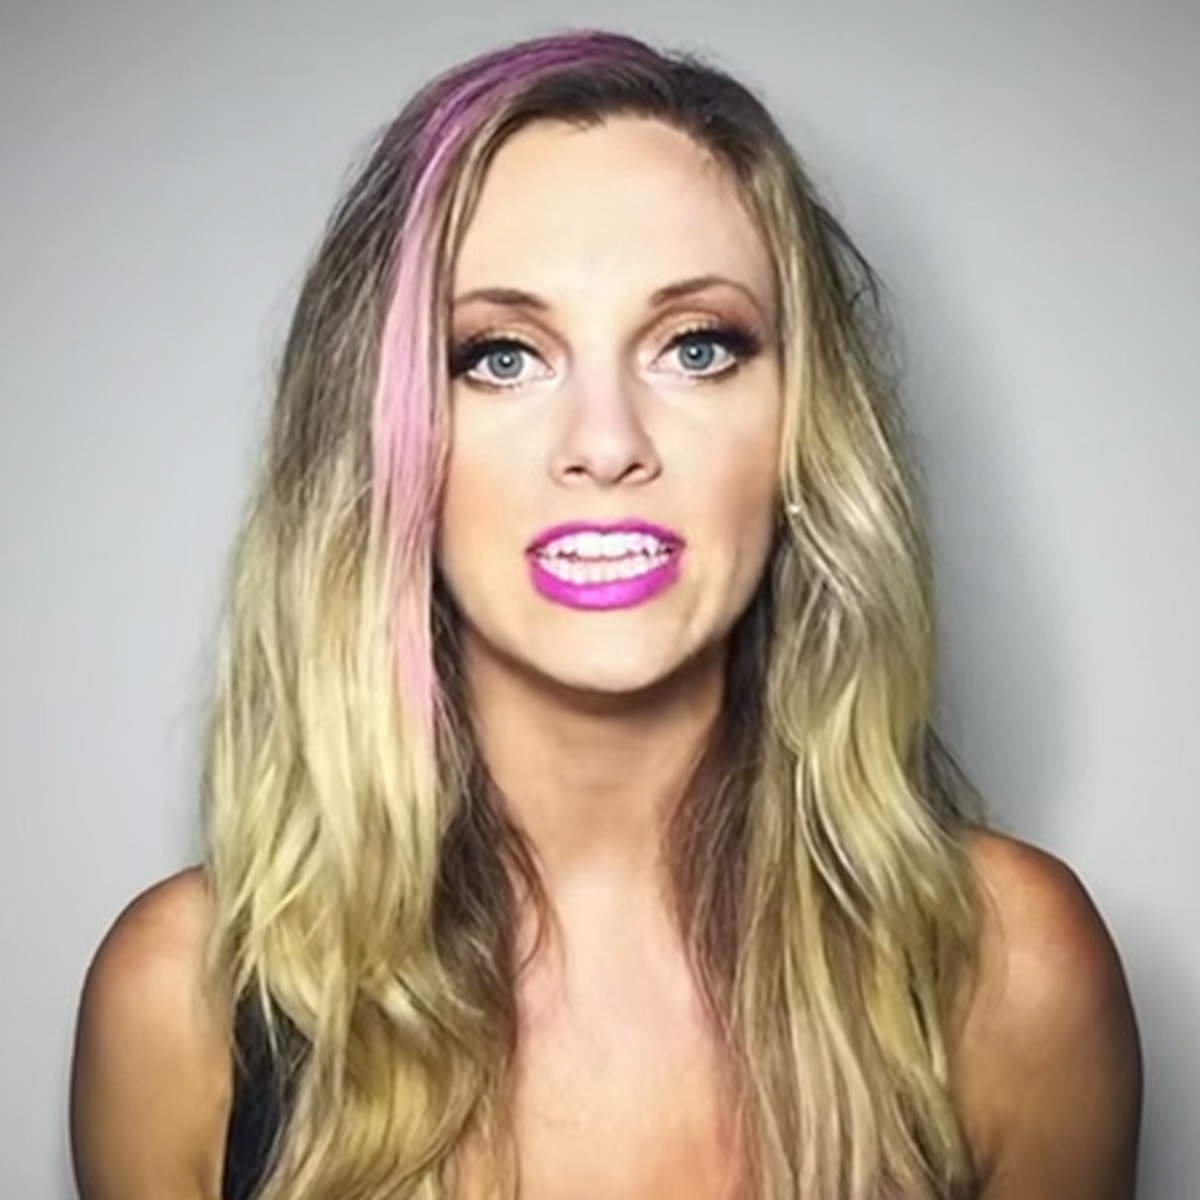 YouTube Star Nicole Arbour Doesn't in Bullying" - E!